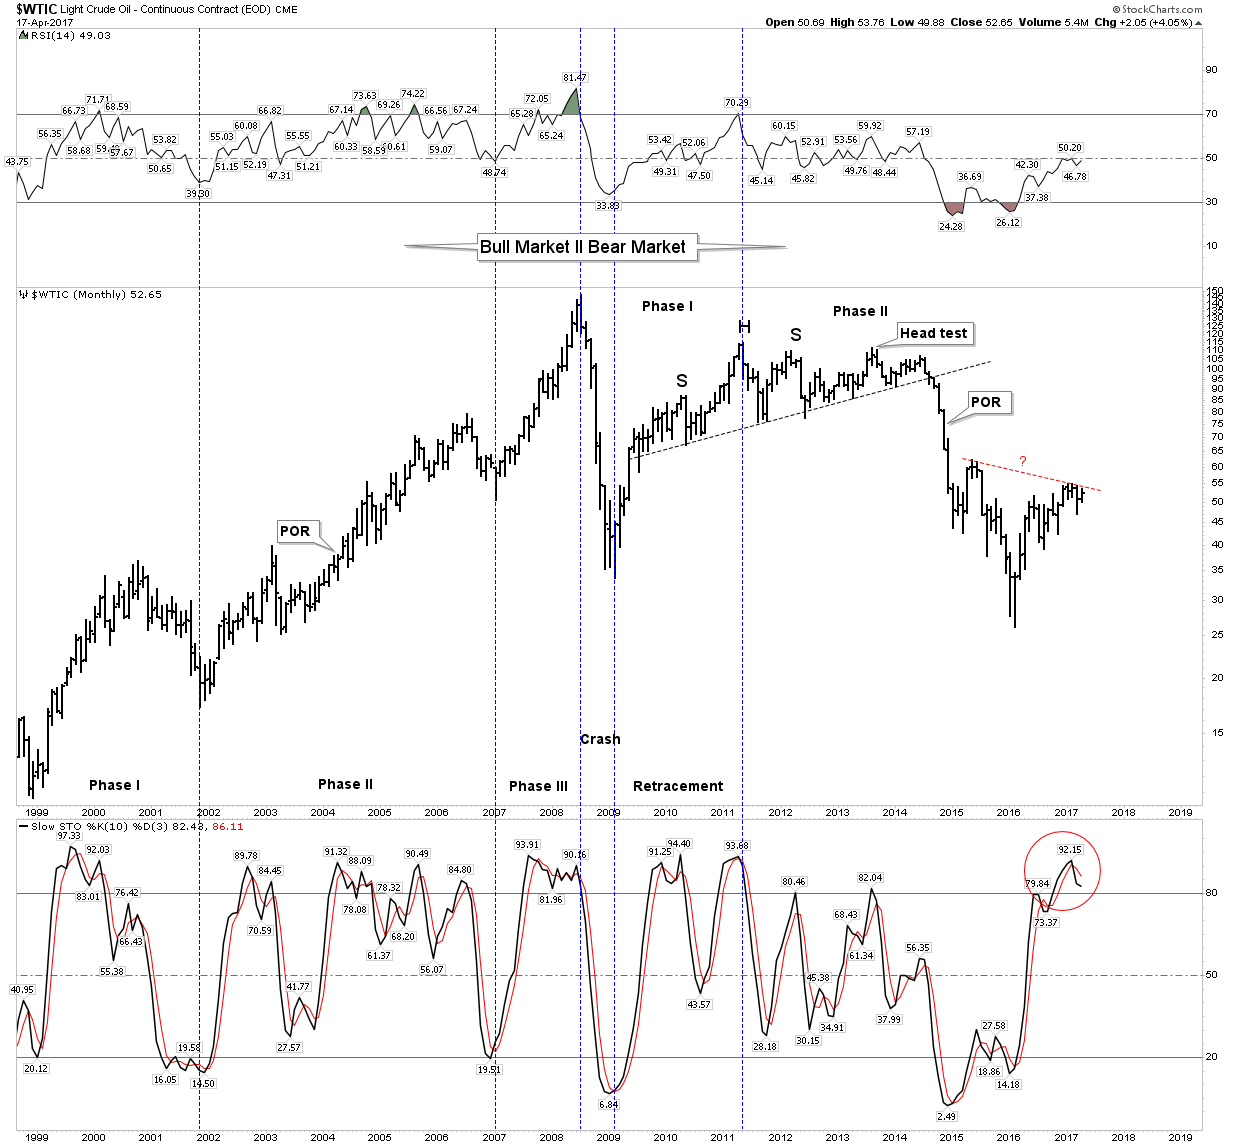 Oil Monthly 1998-2017